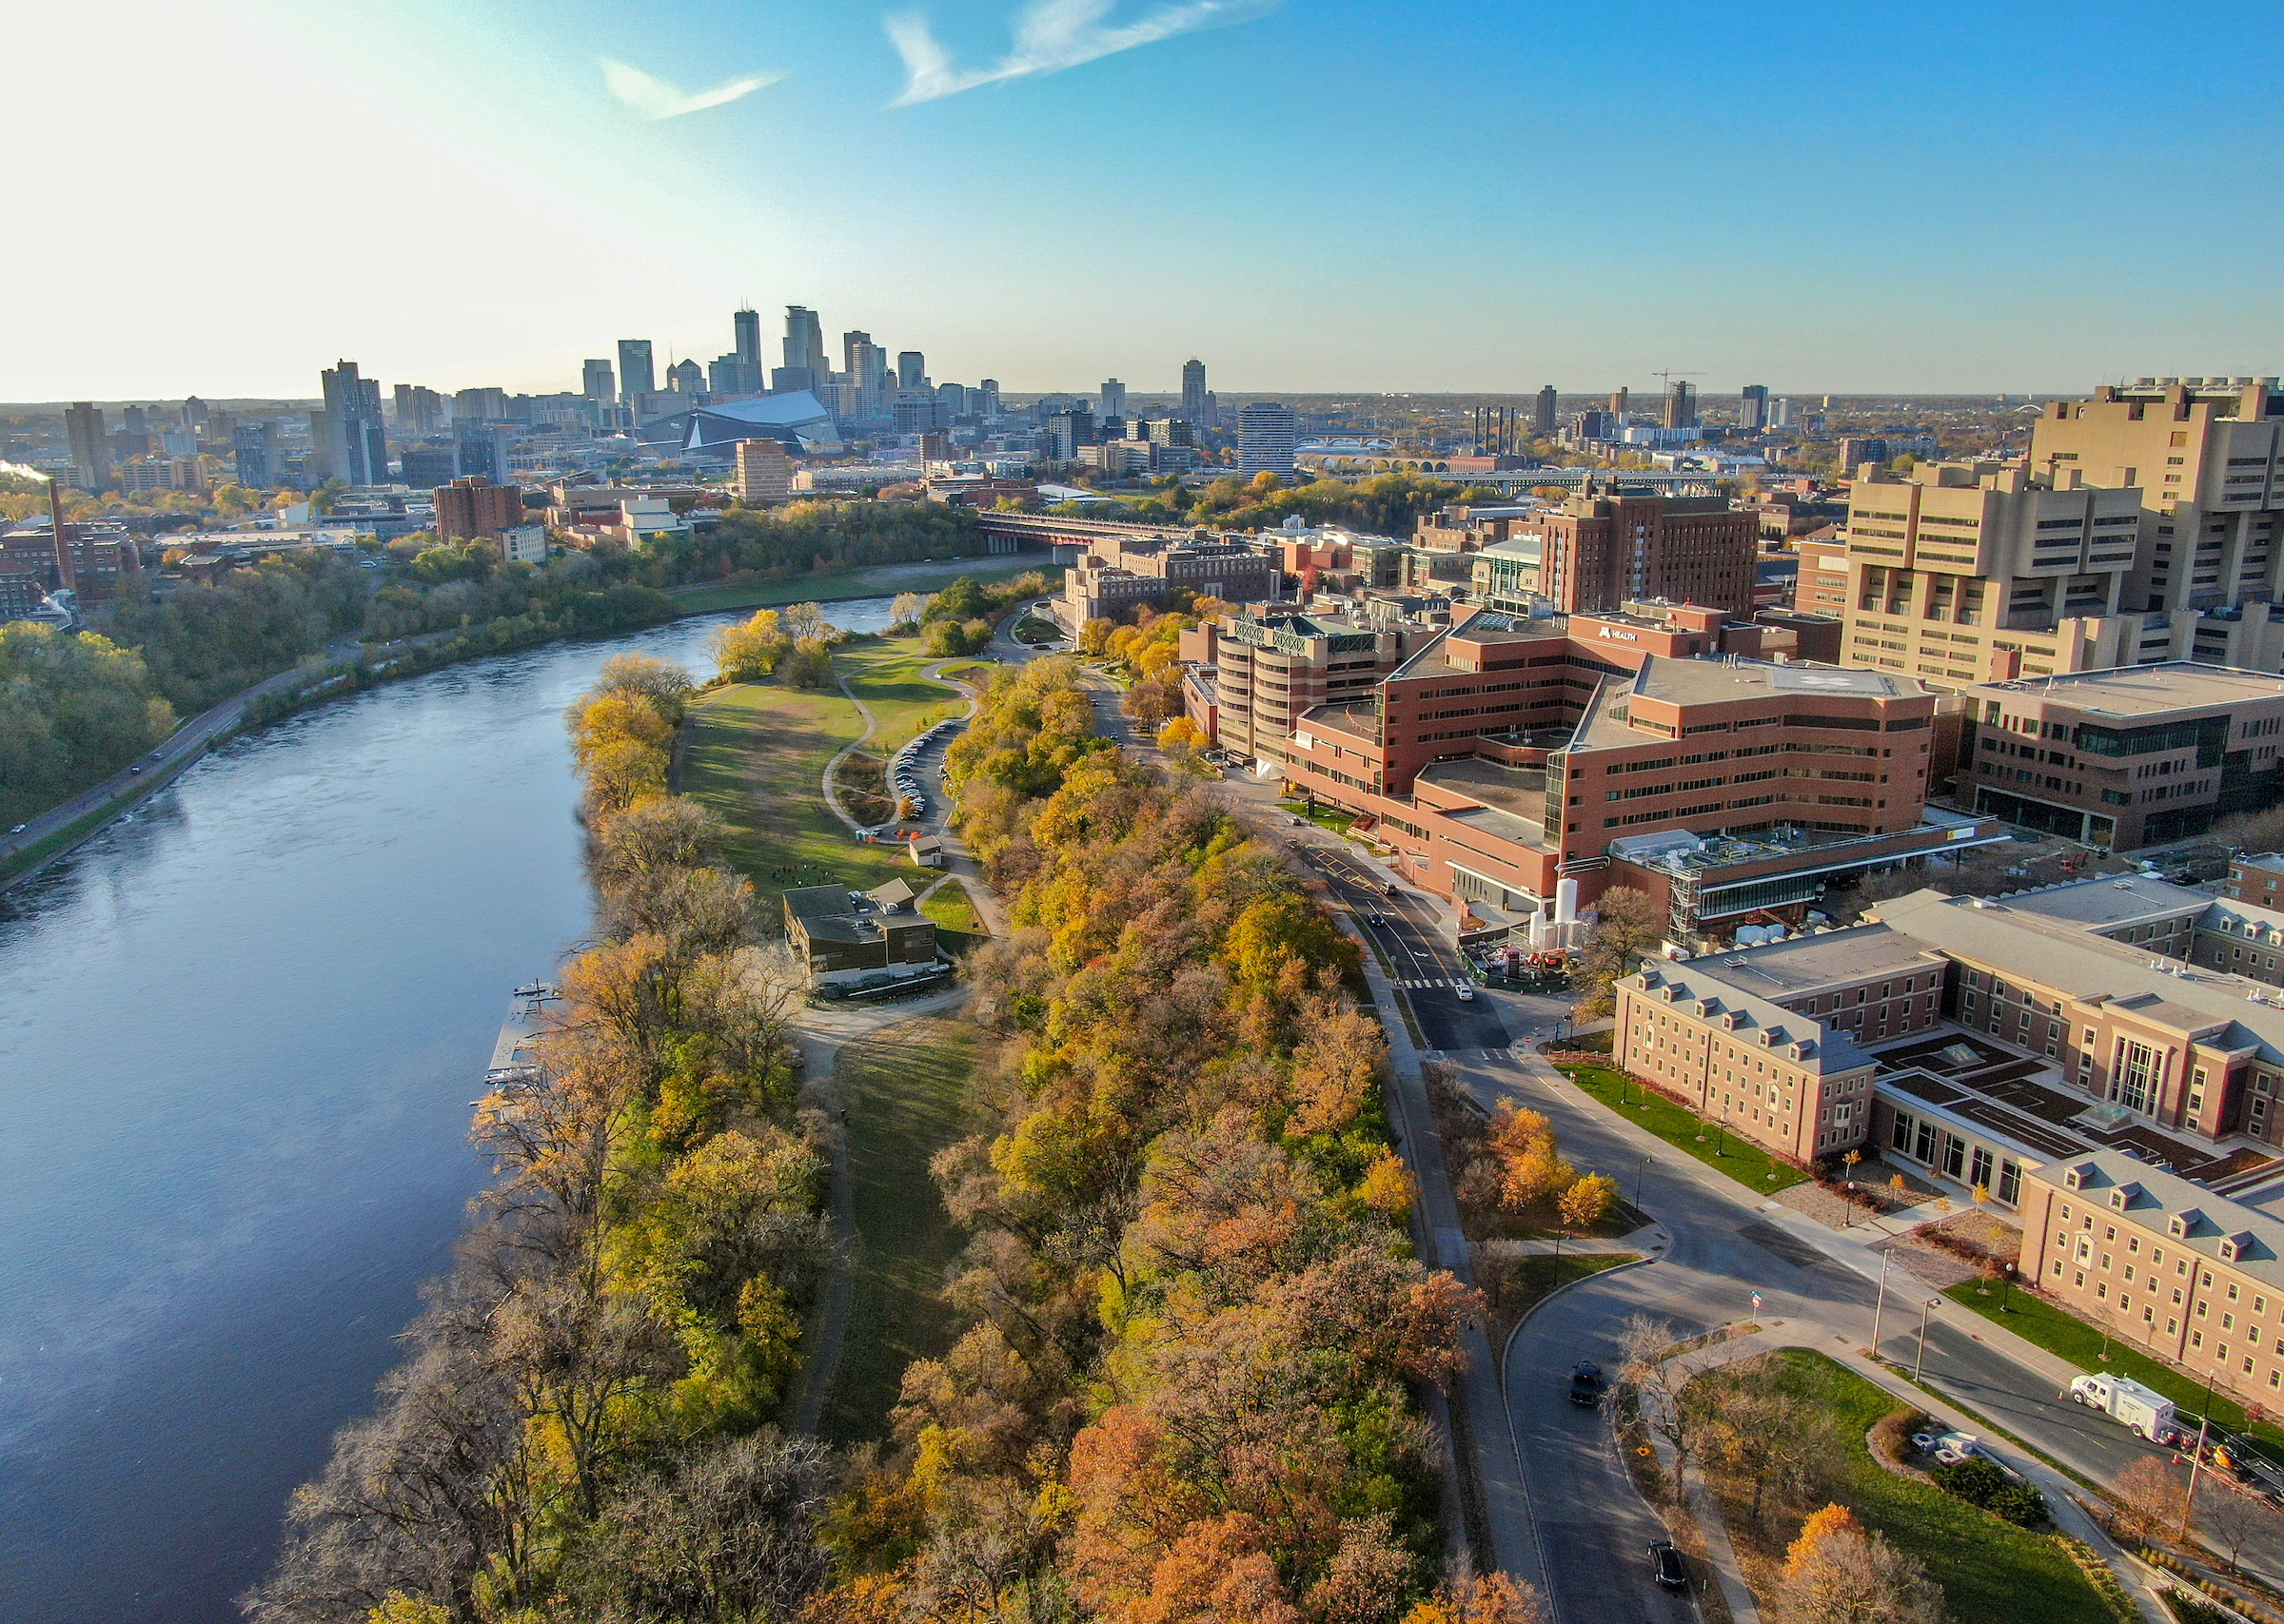 Campus with the Minneapolis skyline in the background and river